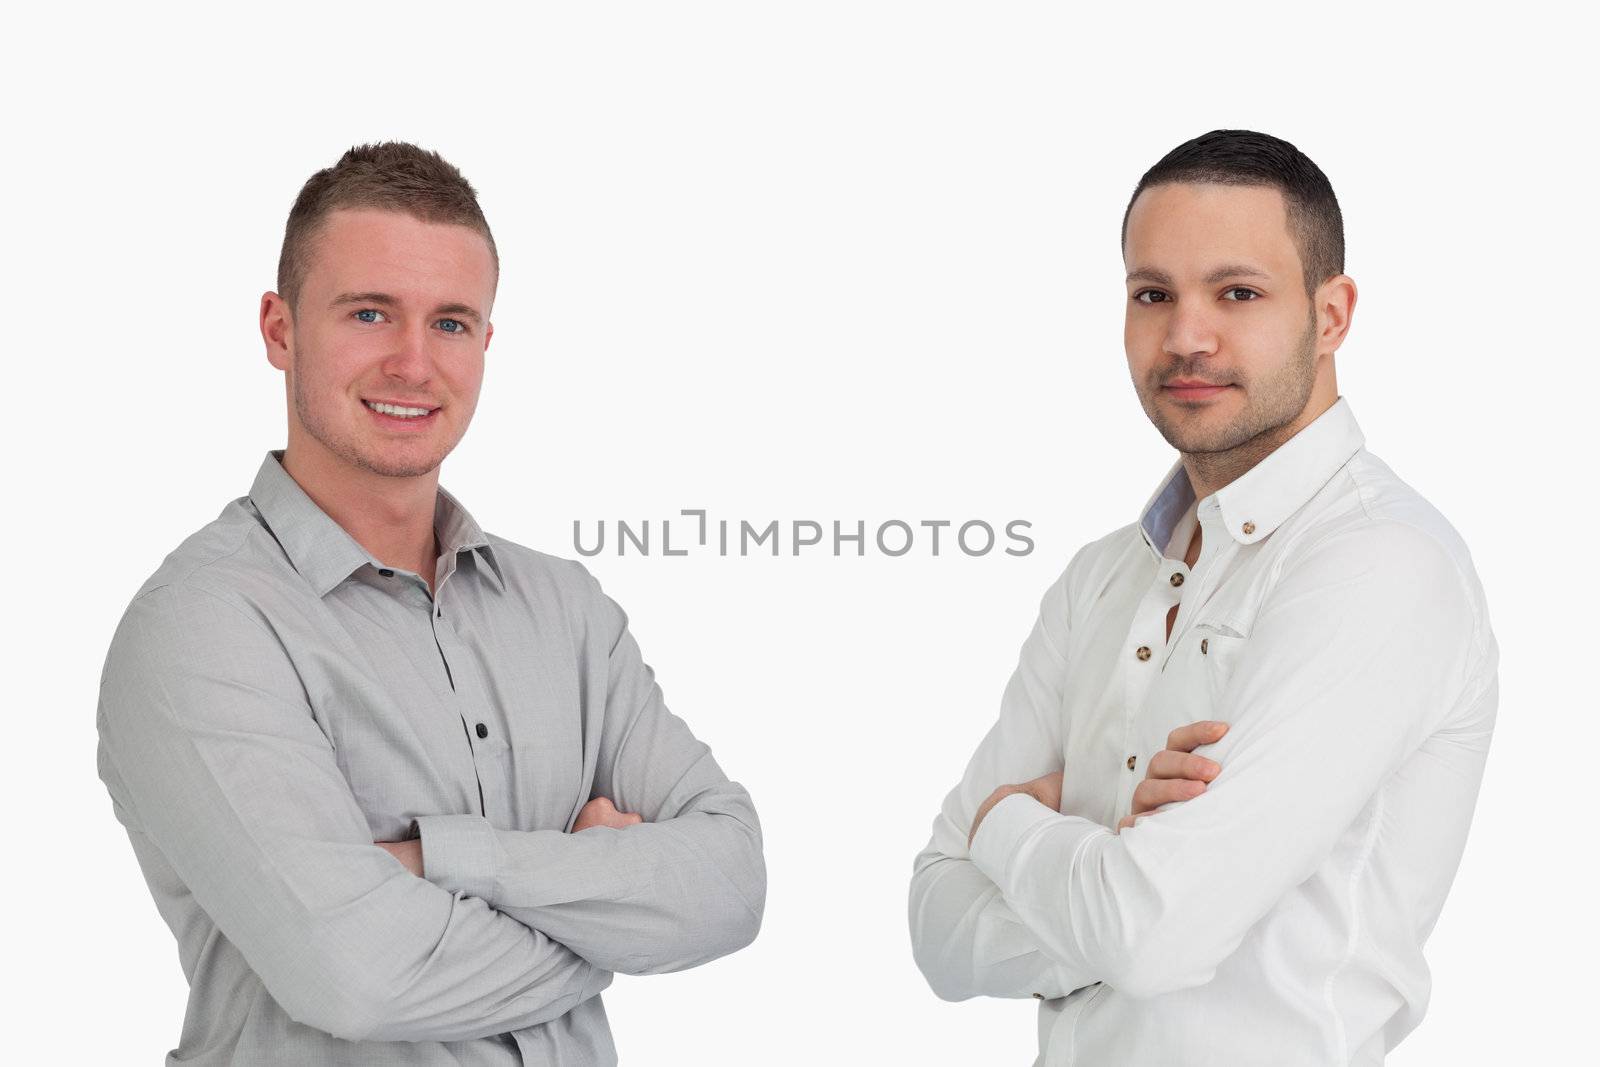 Two men crossing arms and standing side by side against a white background